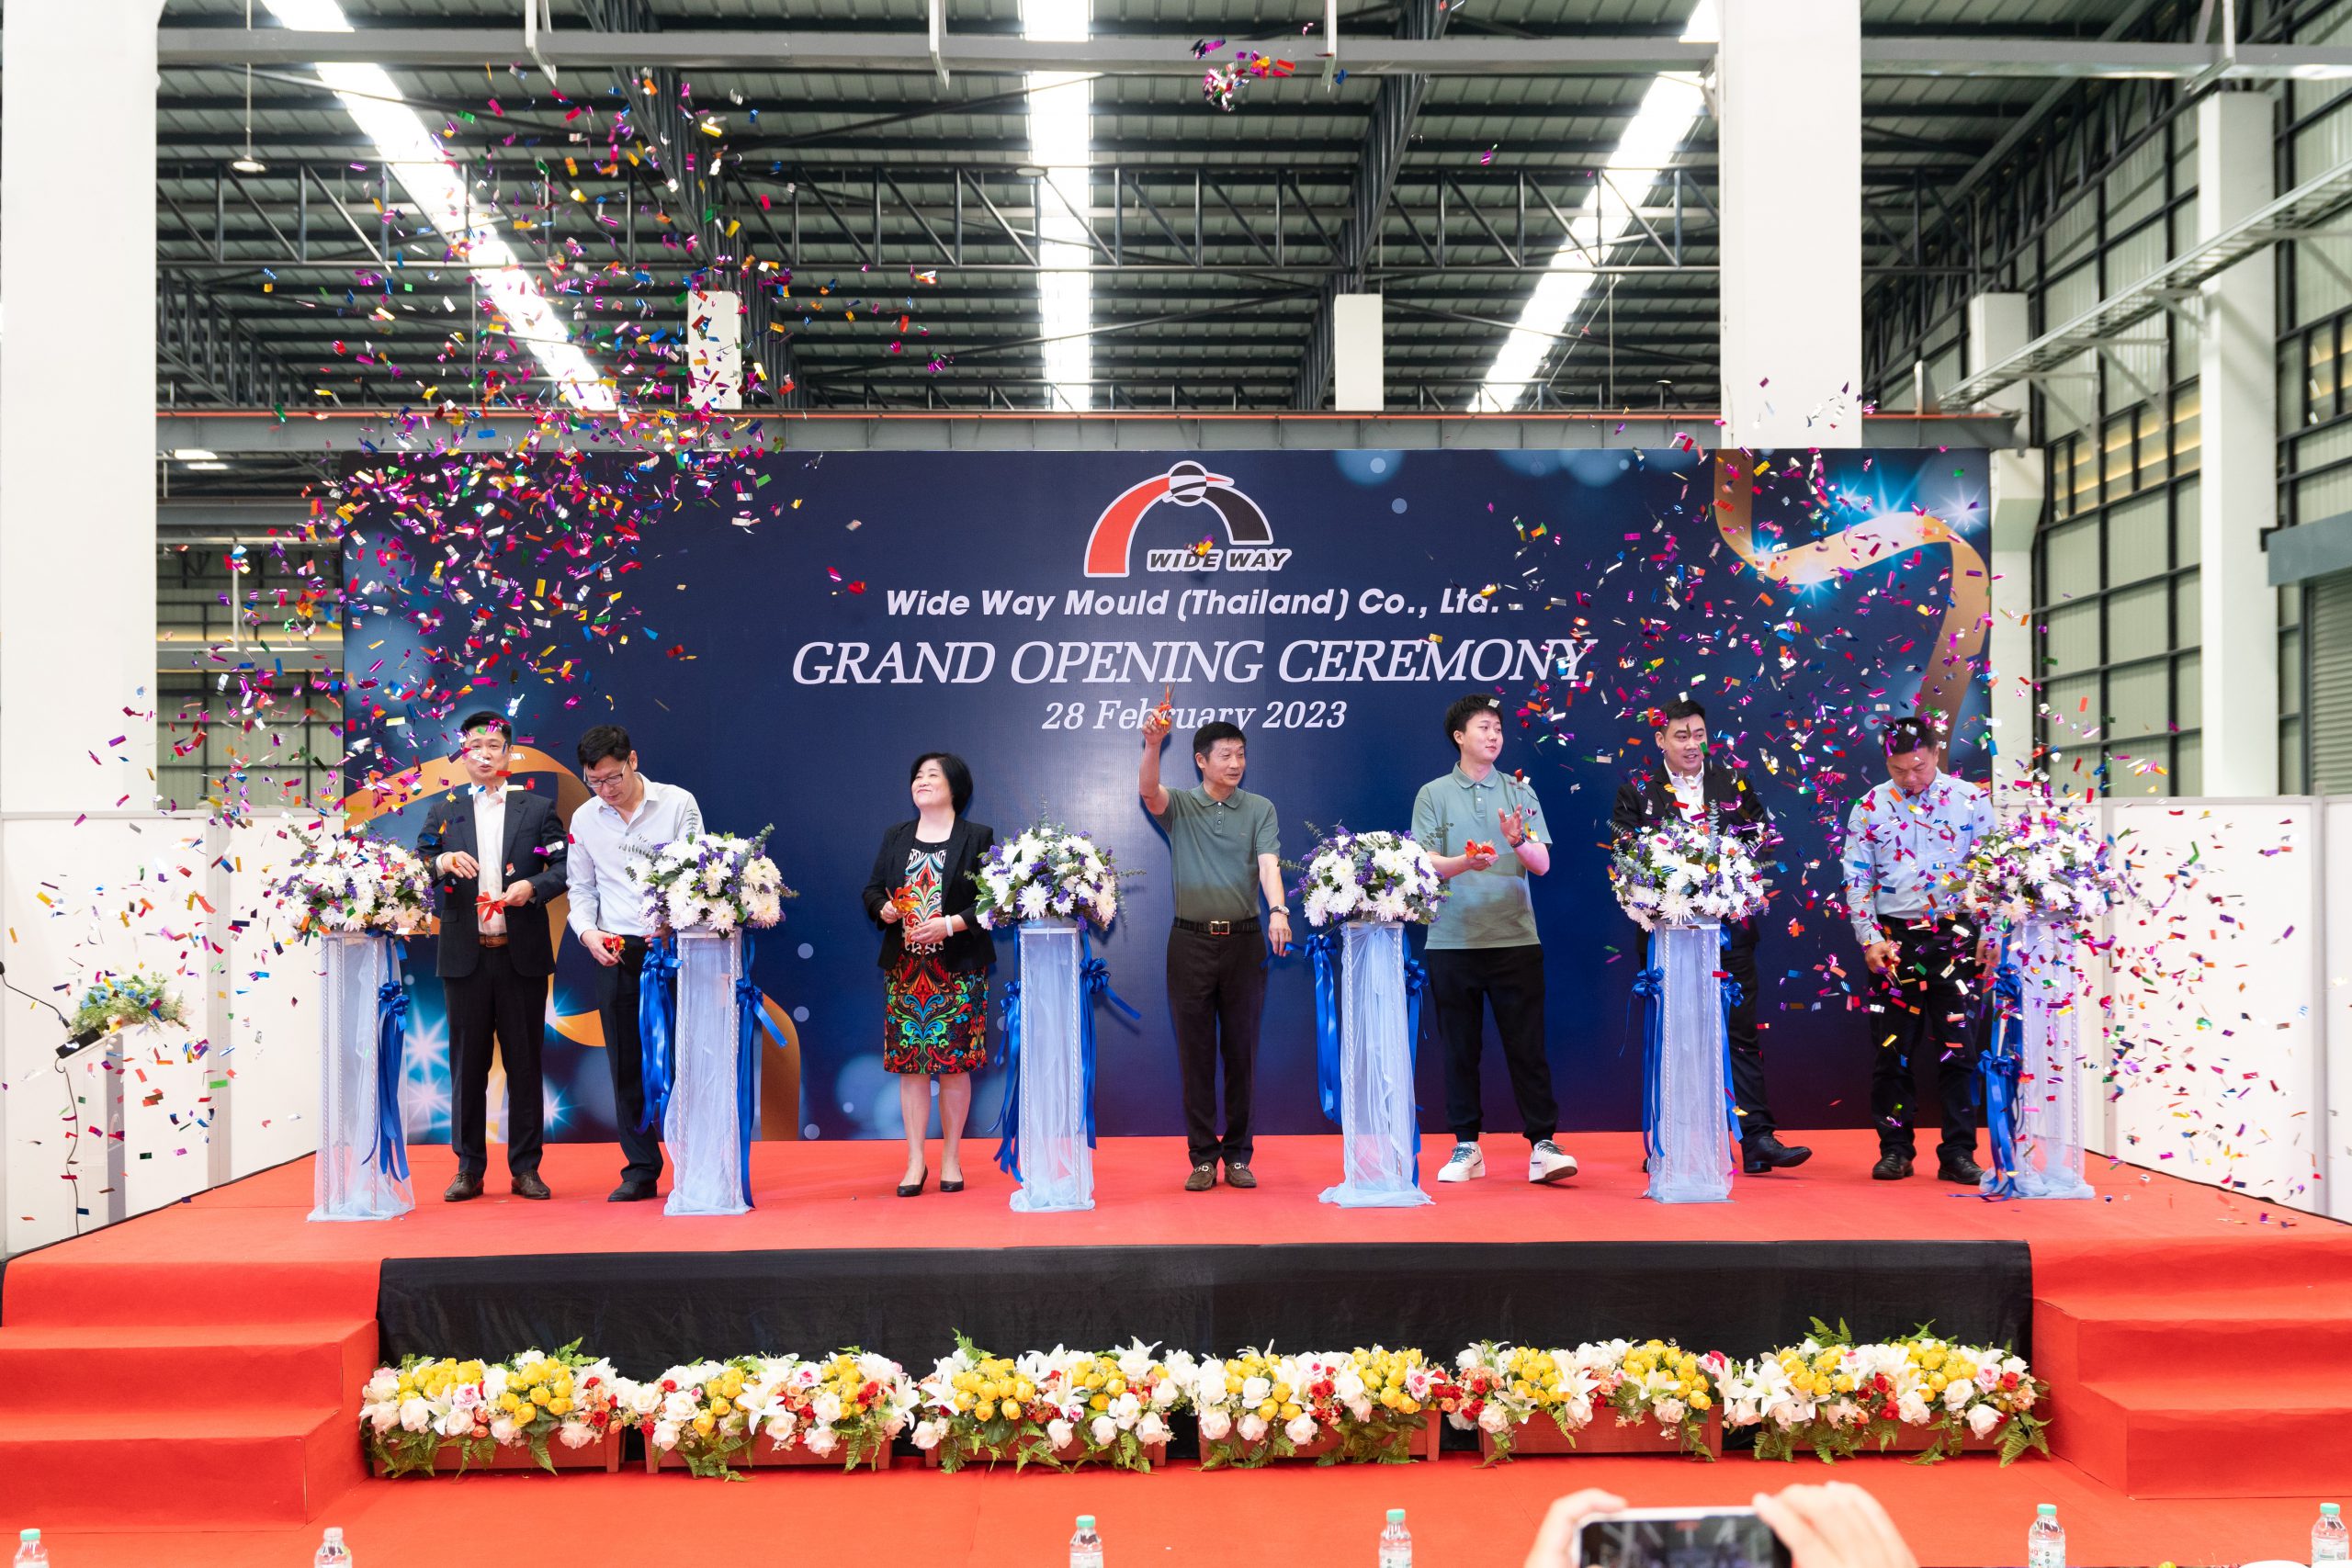 GRAND OPENING CEREMONY-Wide Way Mould (Thailand) Co., Ltd.